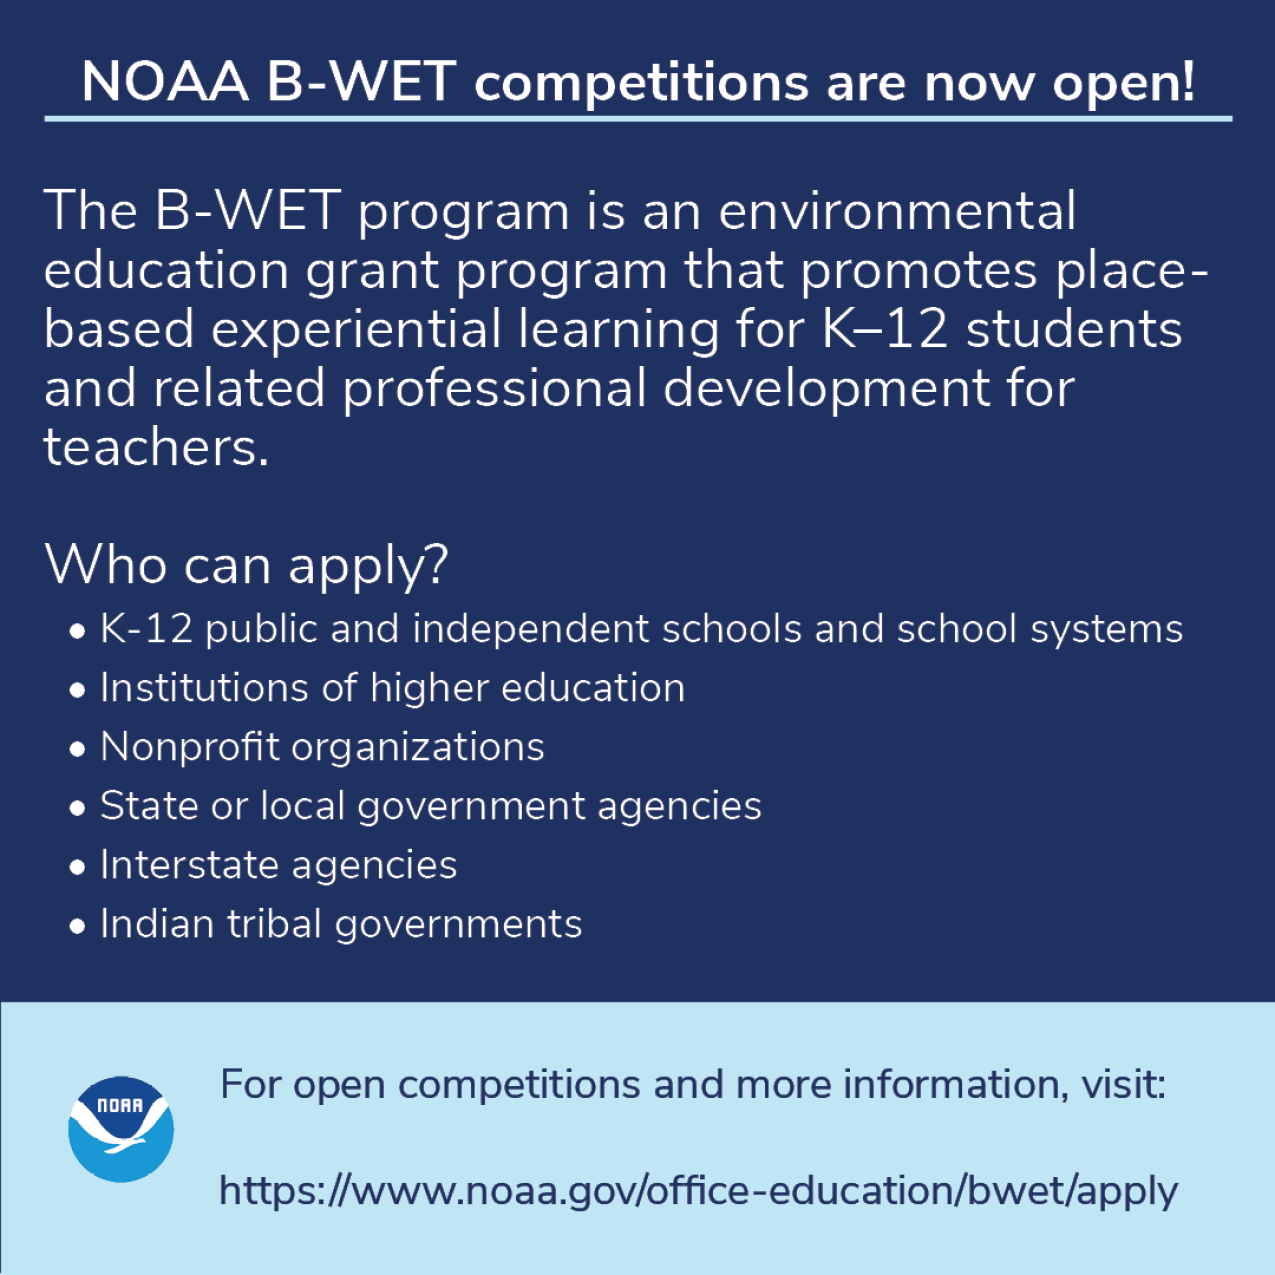 NOAA B-WET competitions are now open! The B-WET program is an environmental education grant program that promotes place-based experiential learning for K–12 students and related professional development for teachers. For open competitions and more information visit https://www.noaa.gov/office-education/bwet/apply. 